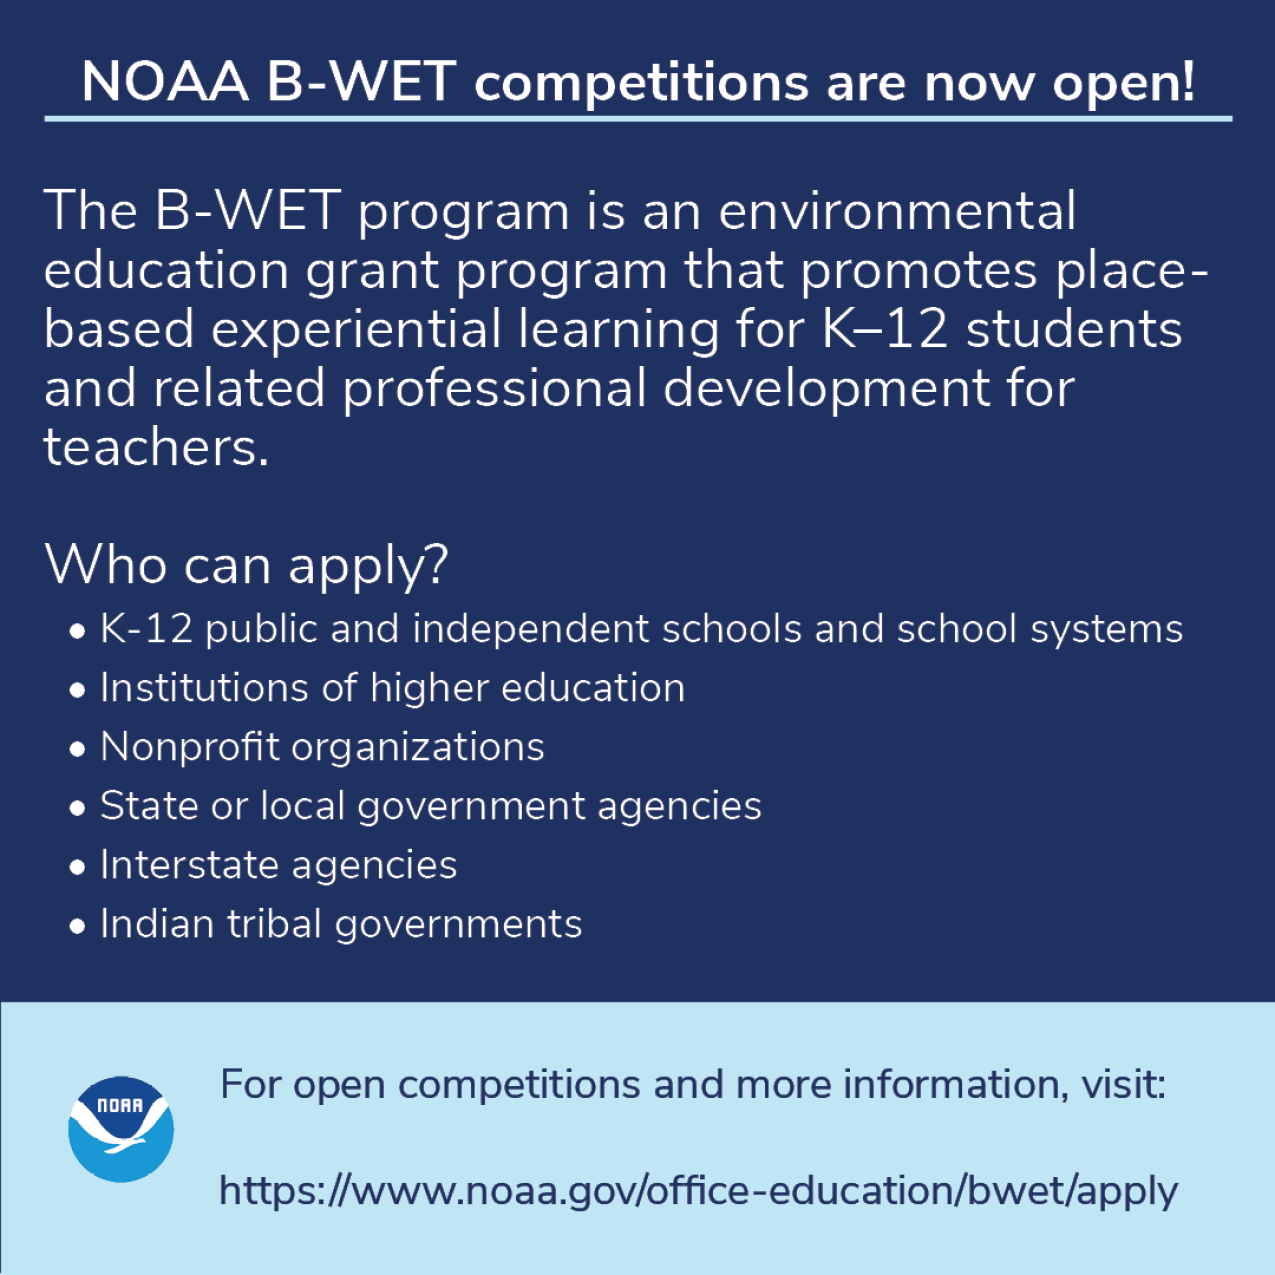 NOAA B-WET competitions are now open! The B-WET program is an environmental education grant program that promotes place-based experiential learning for K–12 students and related professional development for teachers. For open competitions and more information visit https://www.noaa.gov/office-education/bwet/apply. 